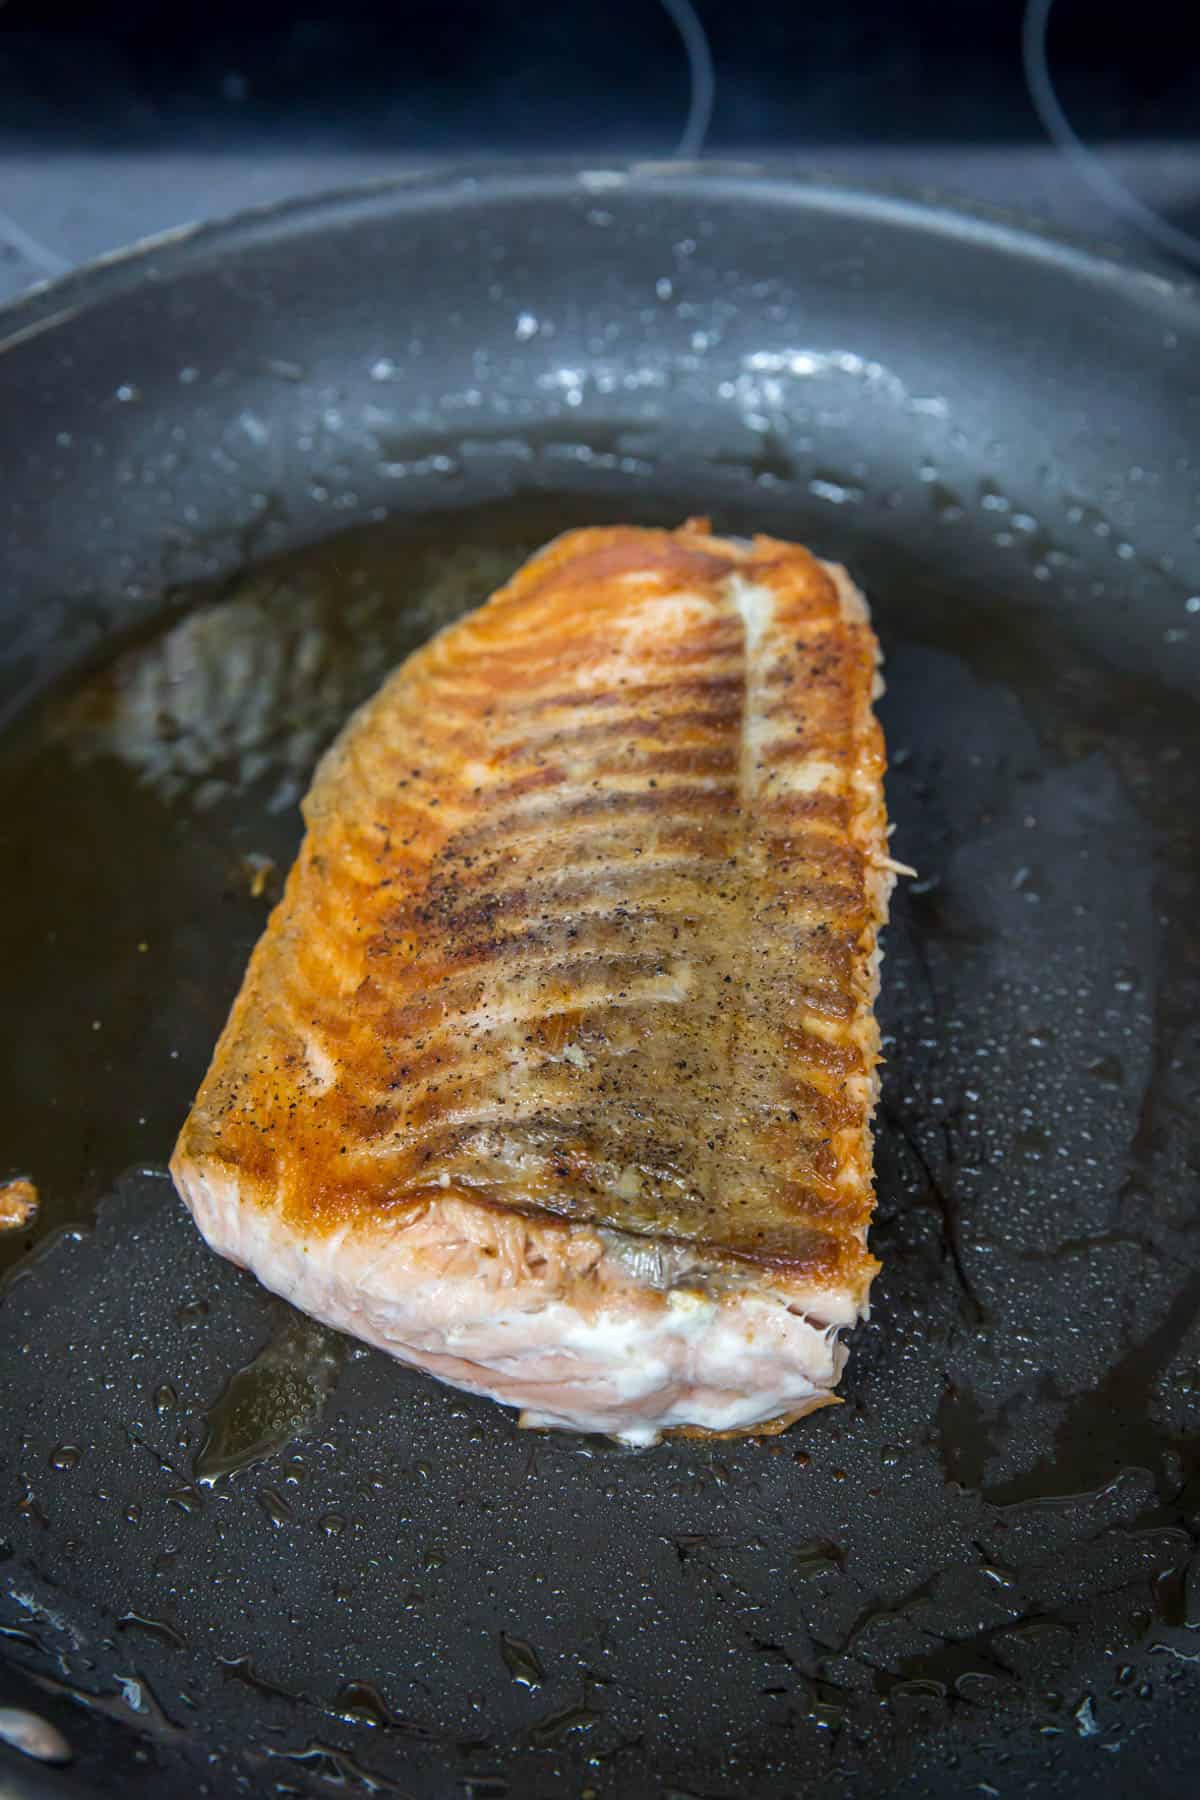 A salmon filet cooking in a nonstick skillet.